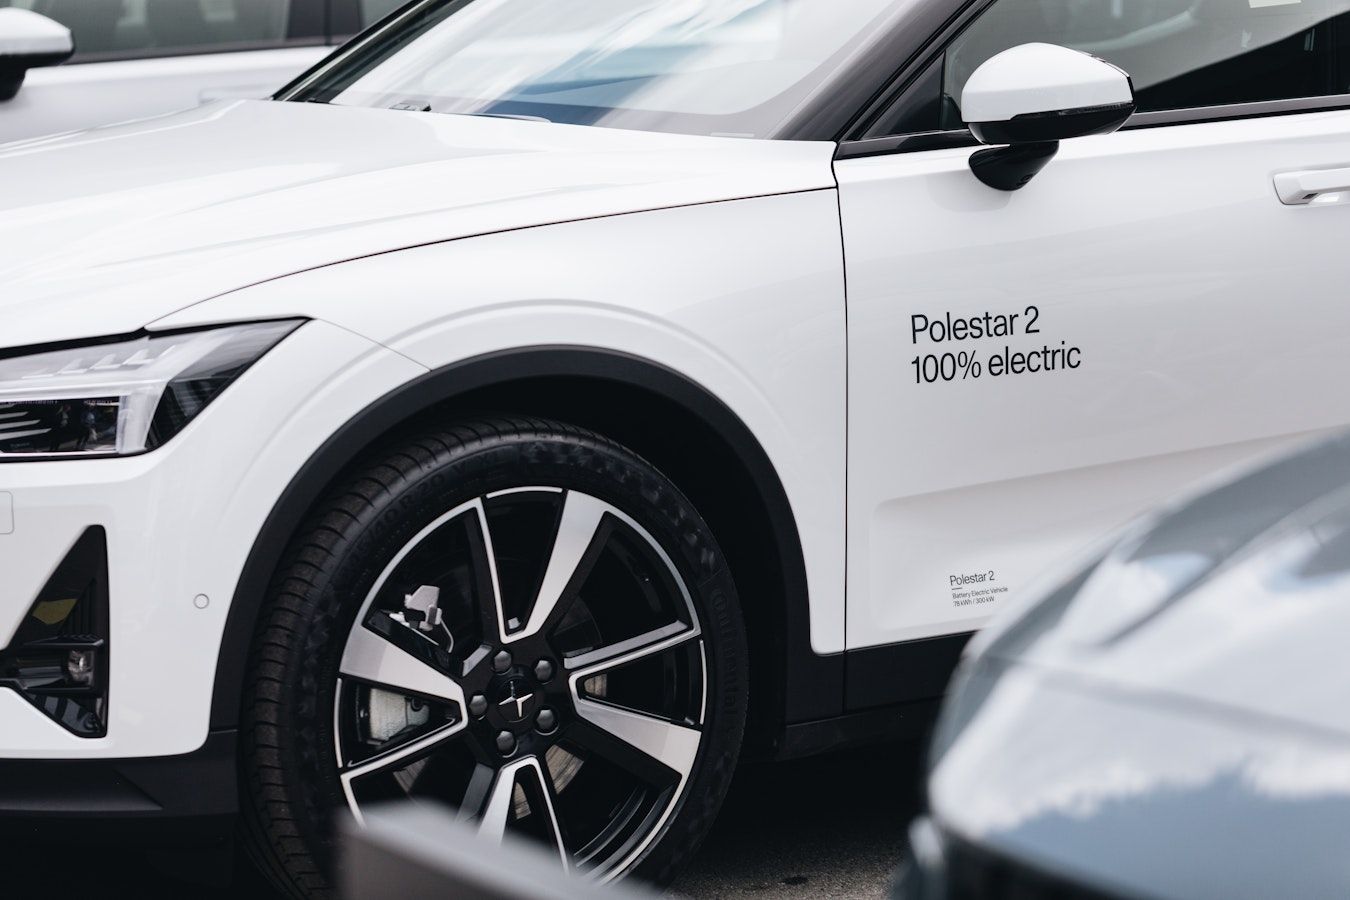 Close-up of the side of the Polestar 2 showing the wheel and the brake